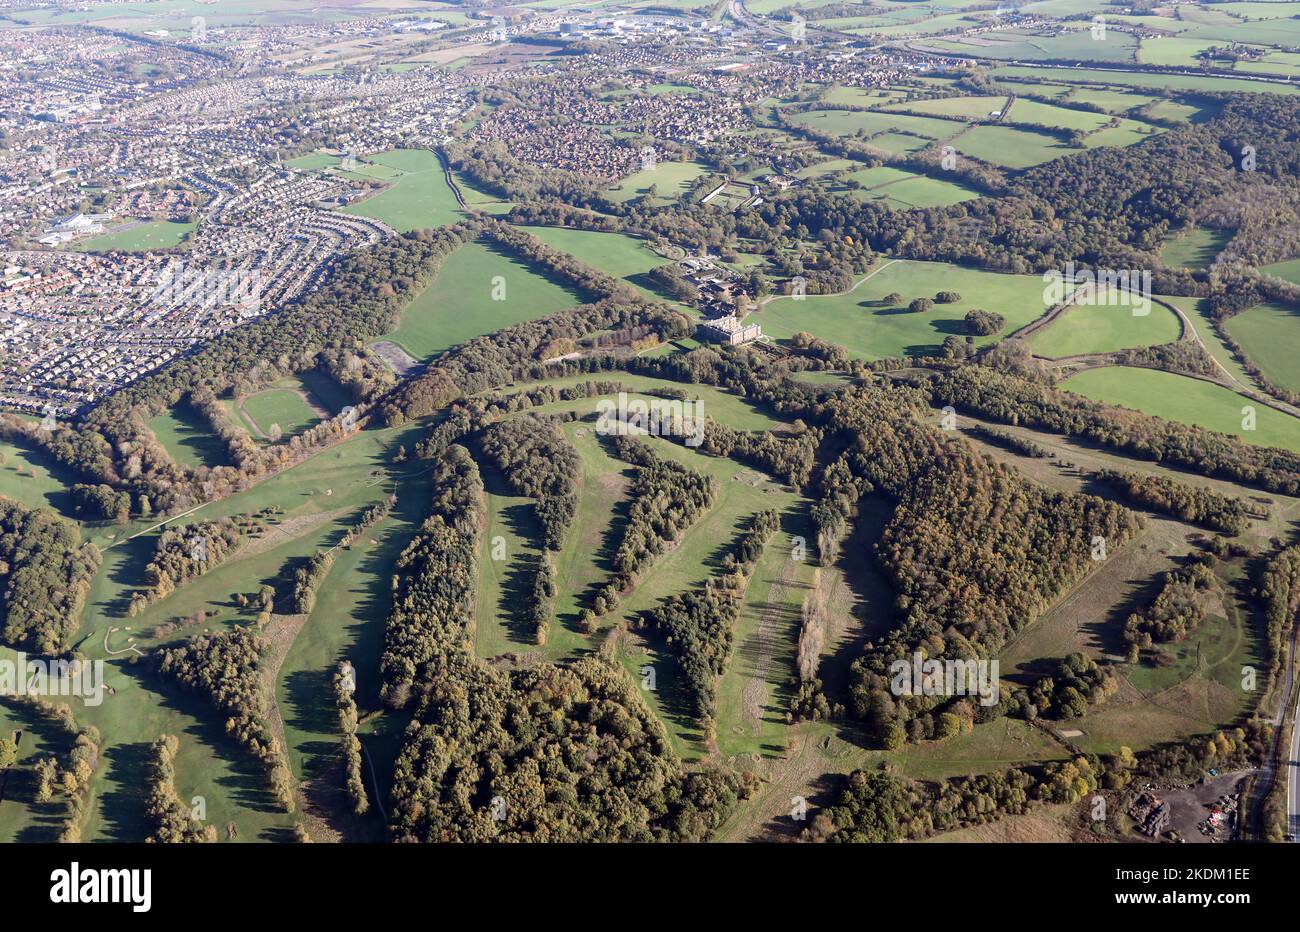 aerial view from the West across Temple Newsam Park Golf Course towards Temple Newsam house, with Colton in the far background Stock Photo